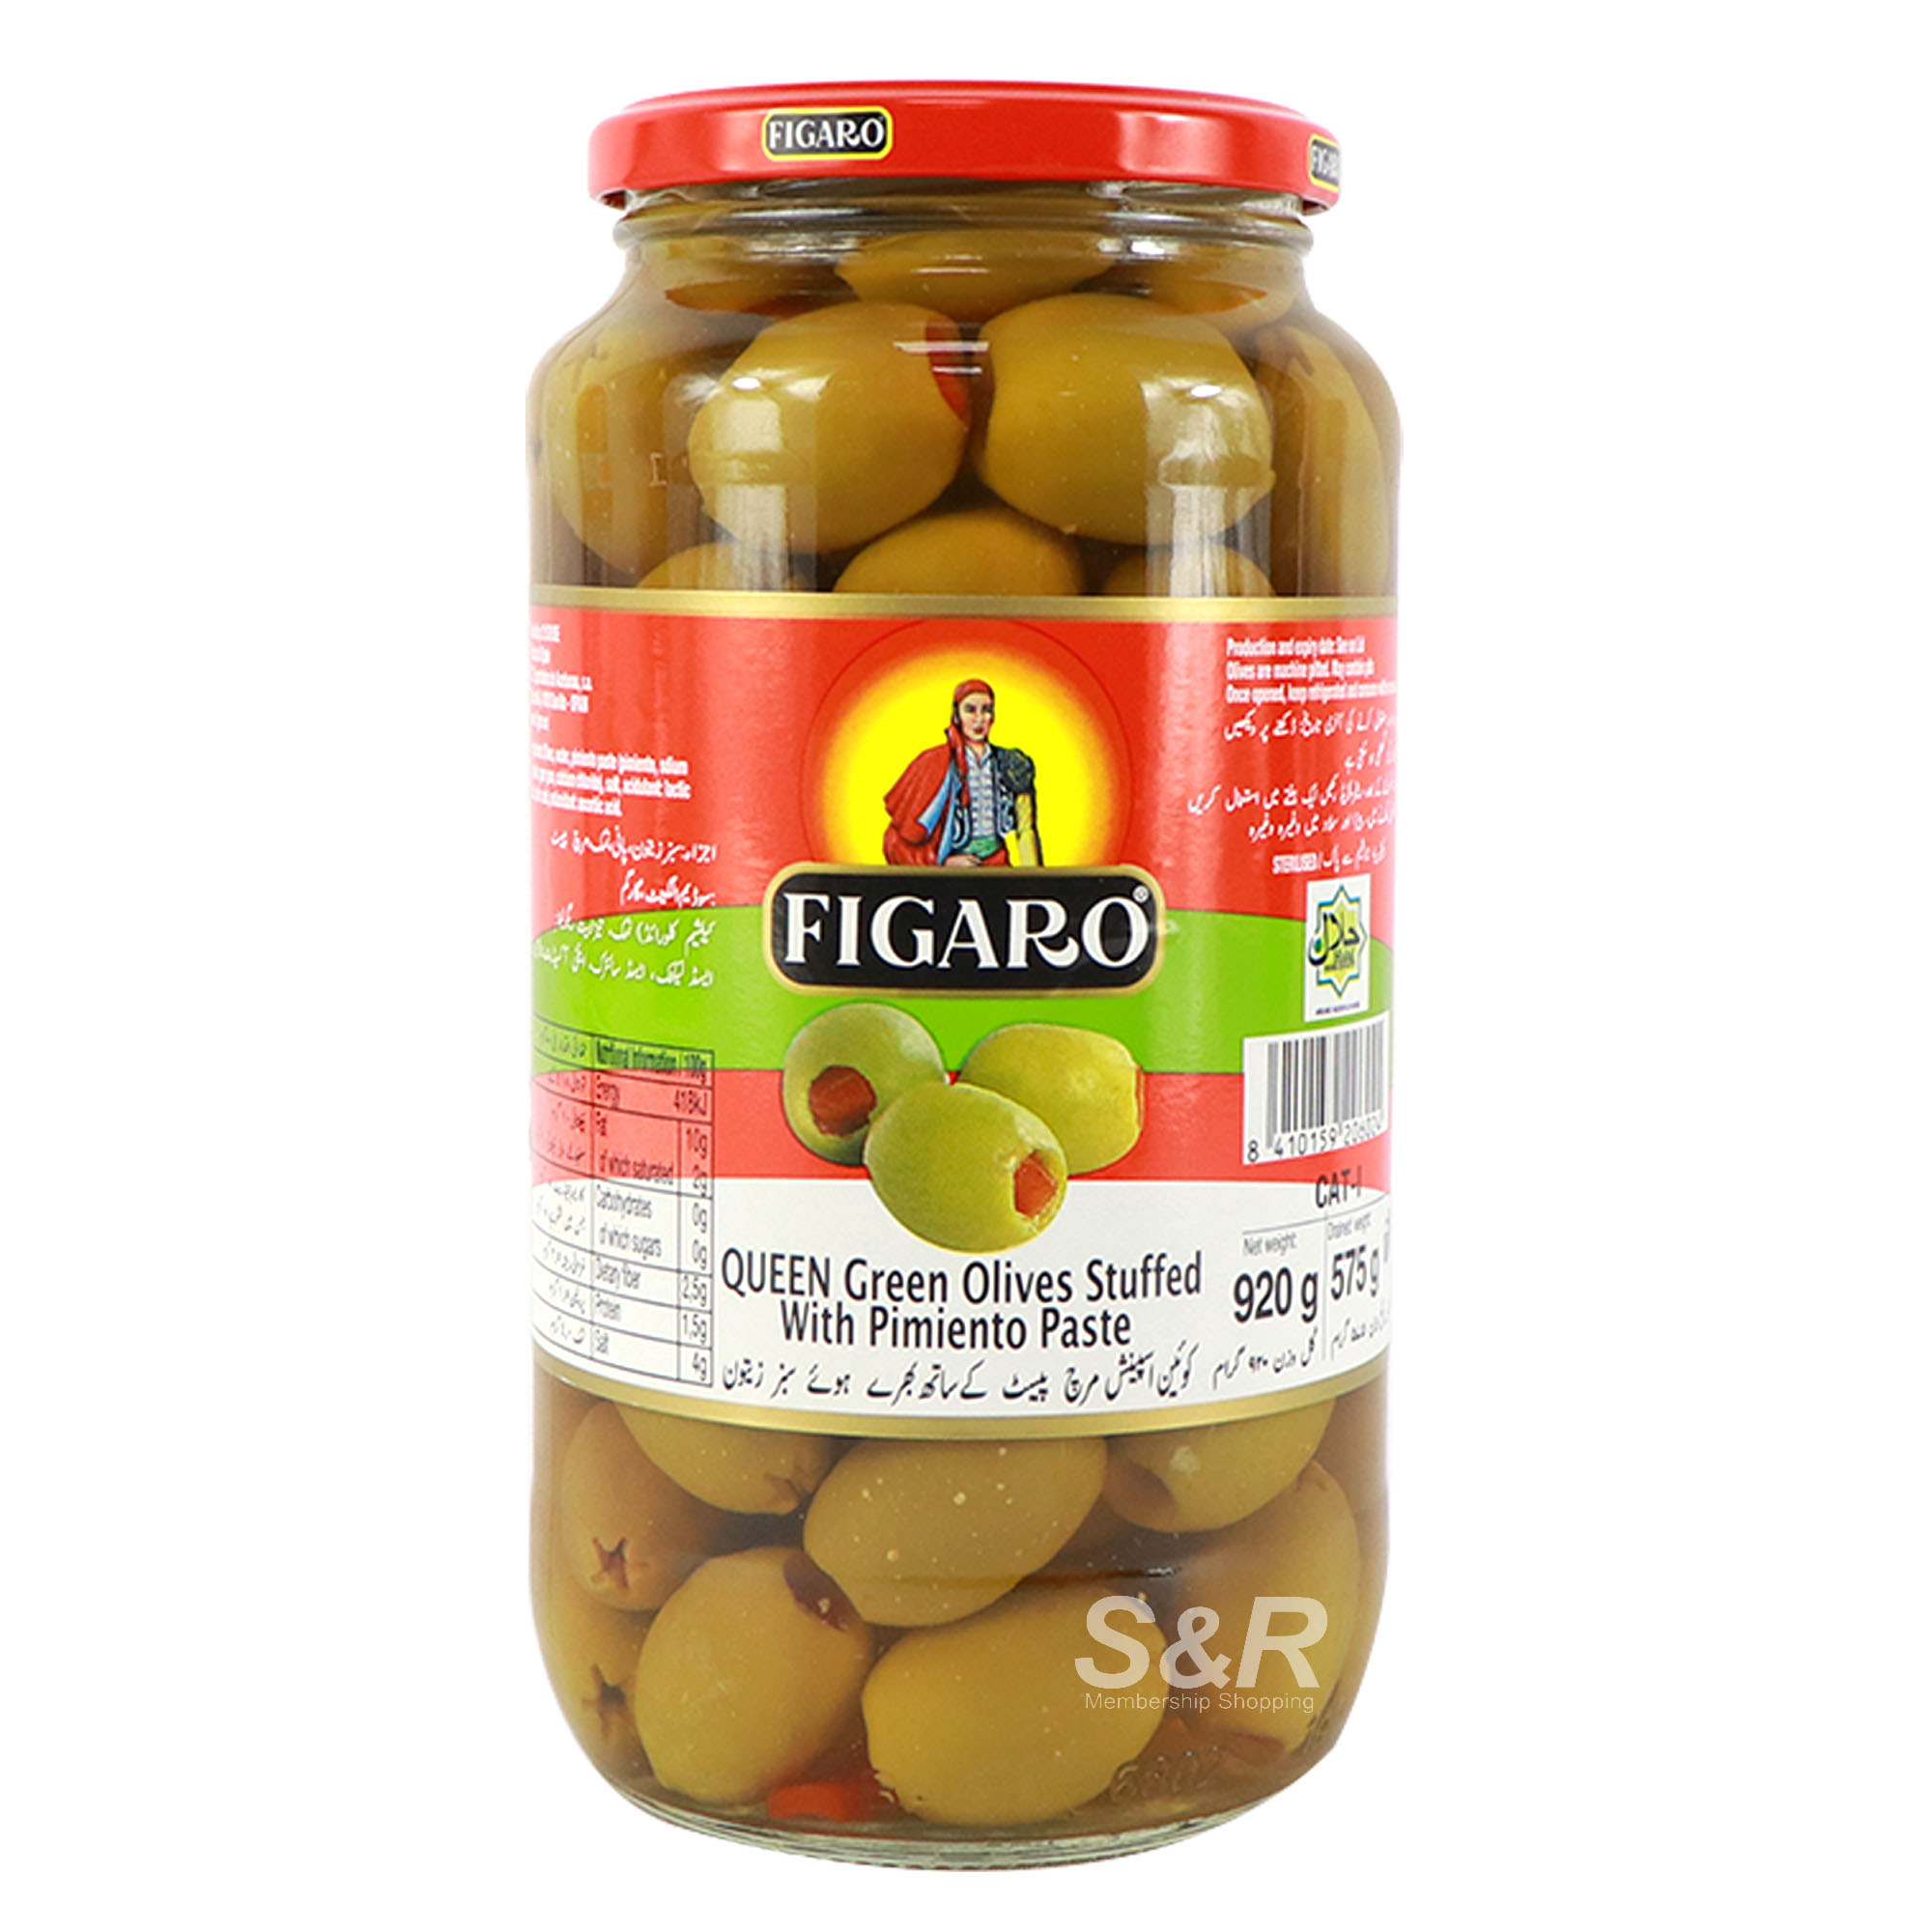 Figaro Queen Green Olives Stuffed with Pimiento Paste 920g